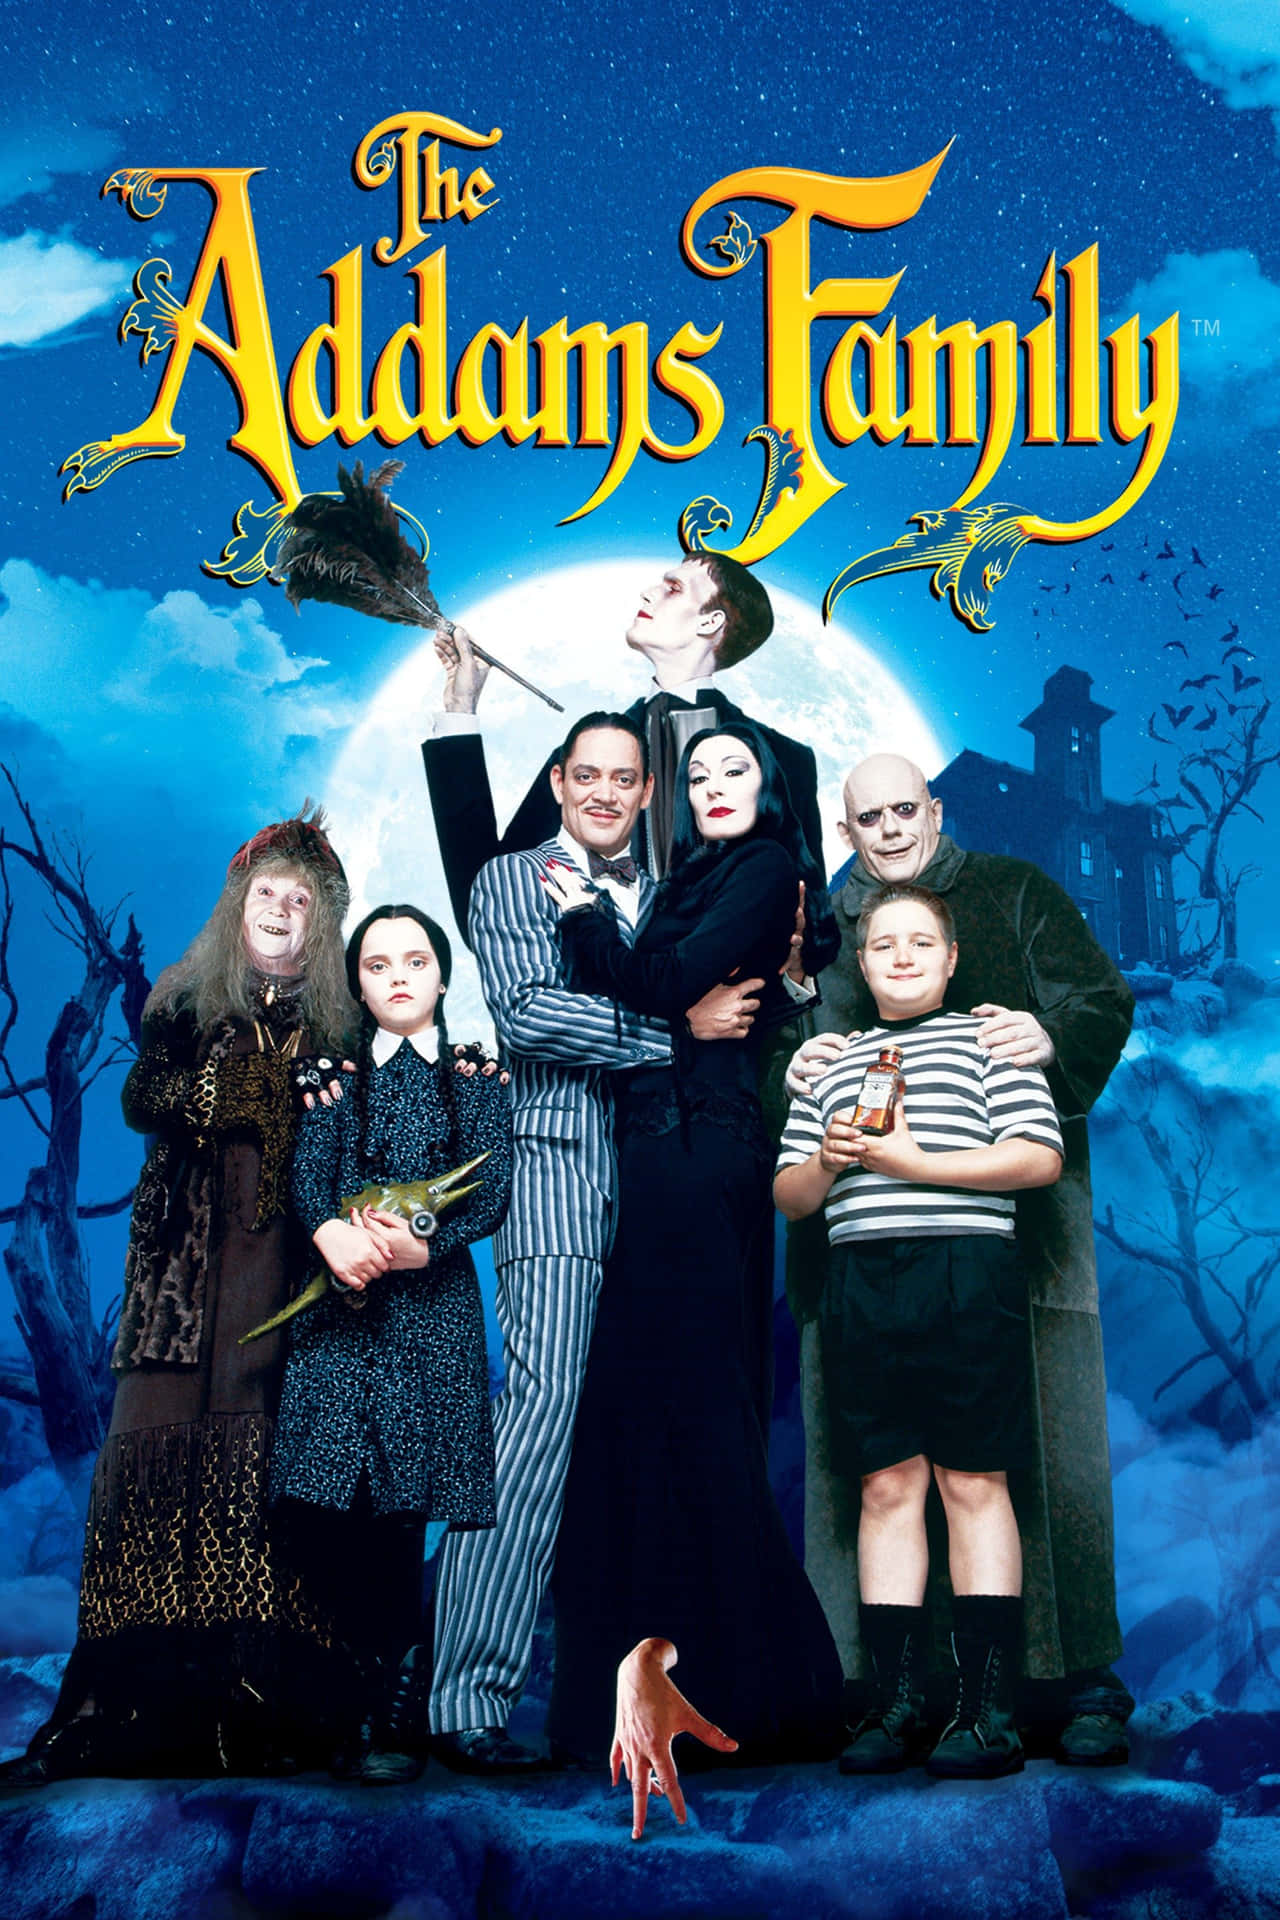 "A Chilling Night Out With The Addams Family"